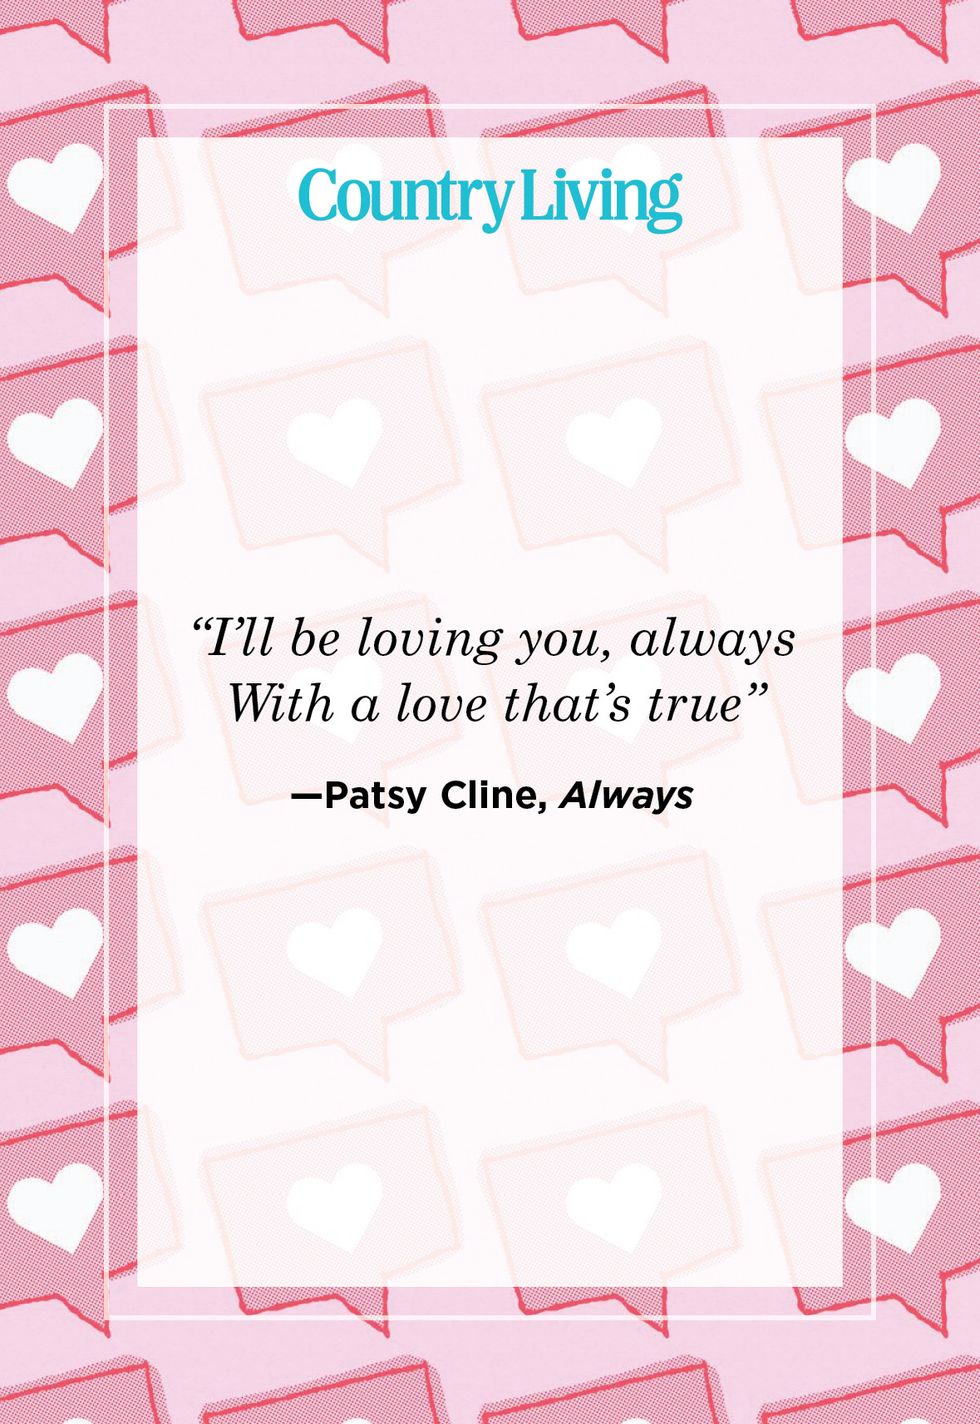 very short love quote for him, patsy cline lyric